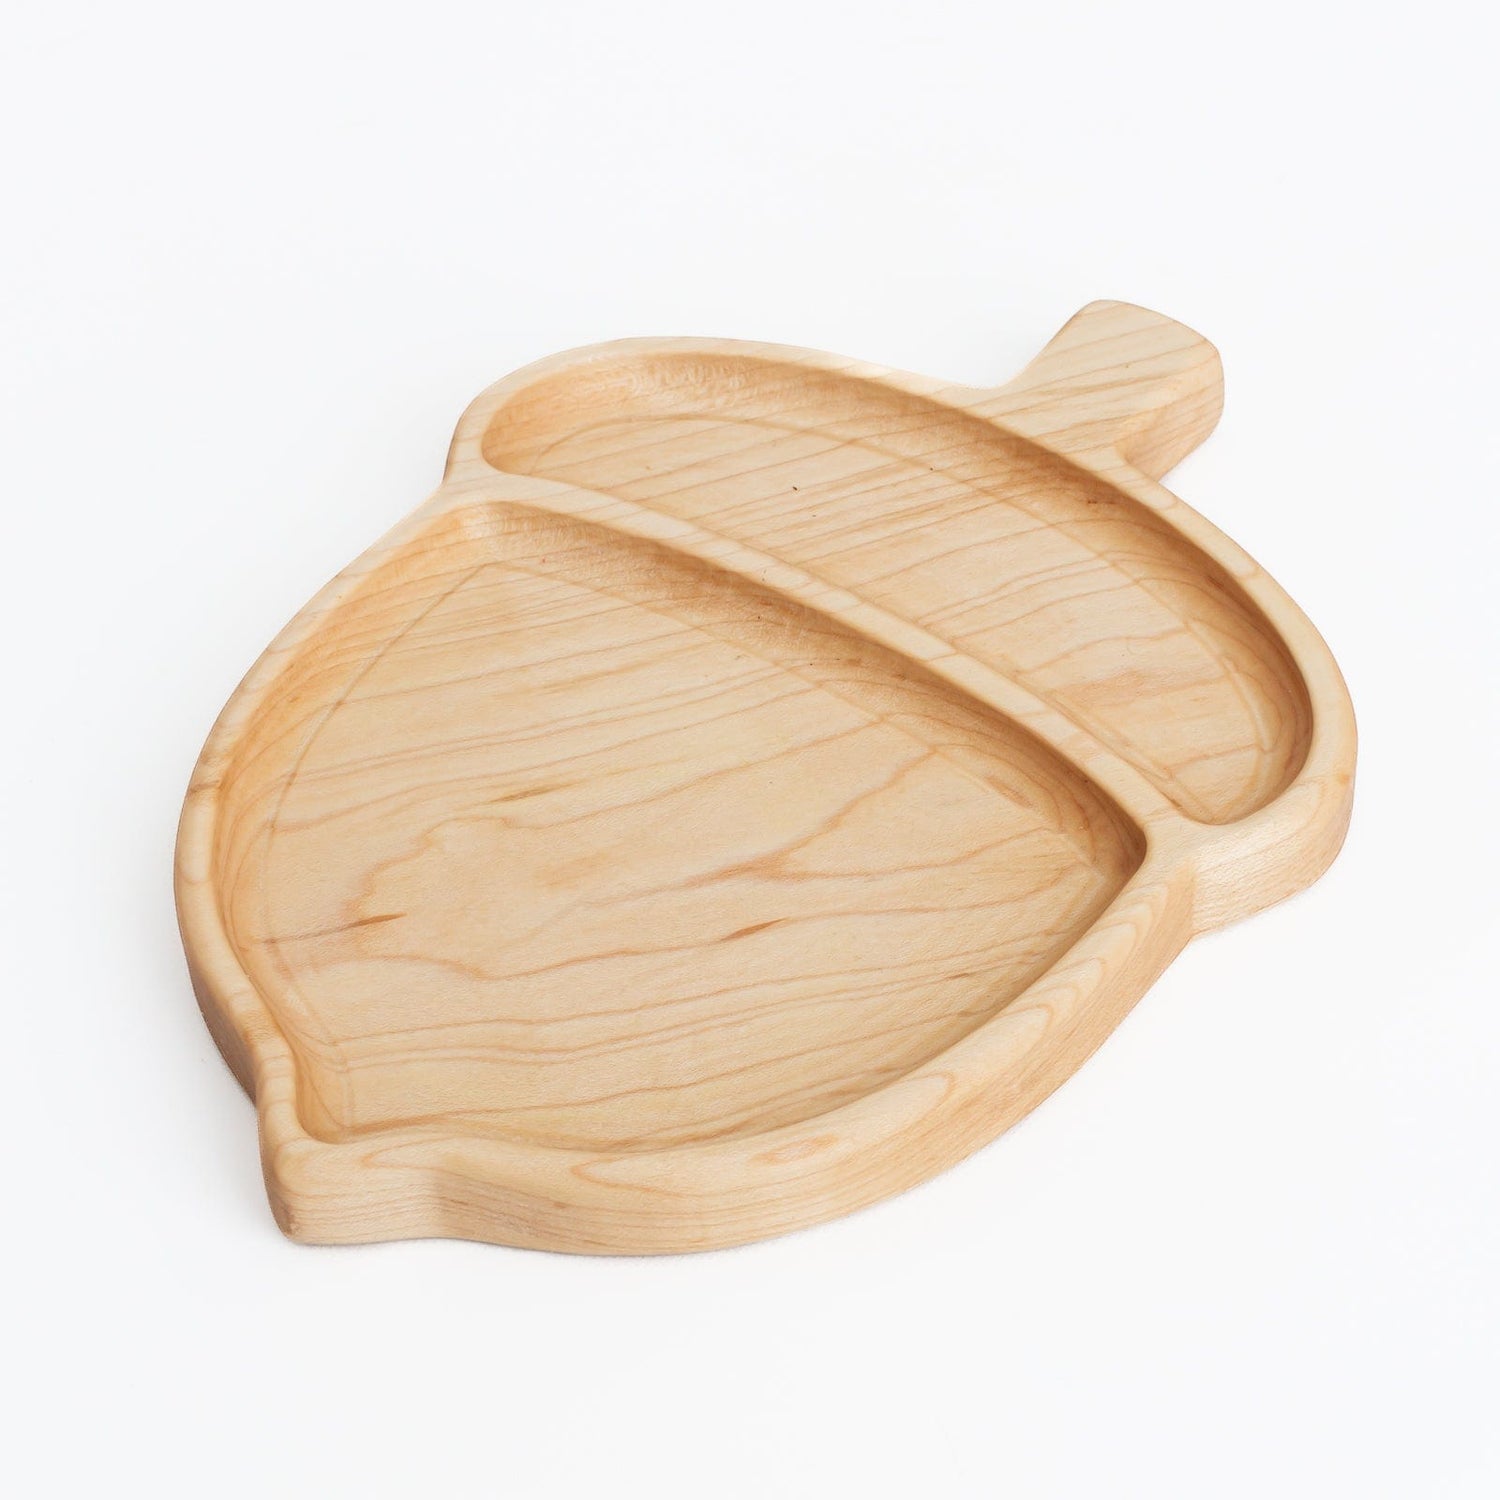 Aw & Co. Sensory Play Wooden Acorn Plate / Sensory Tray (Made in Canada)